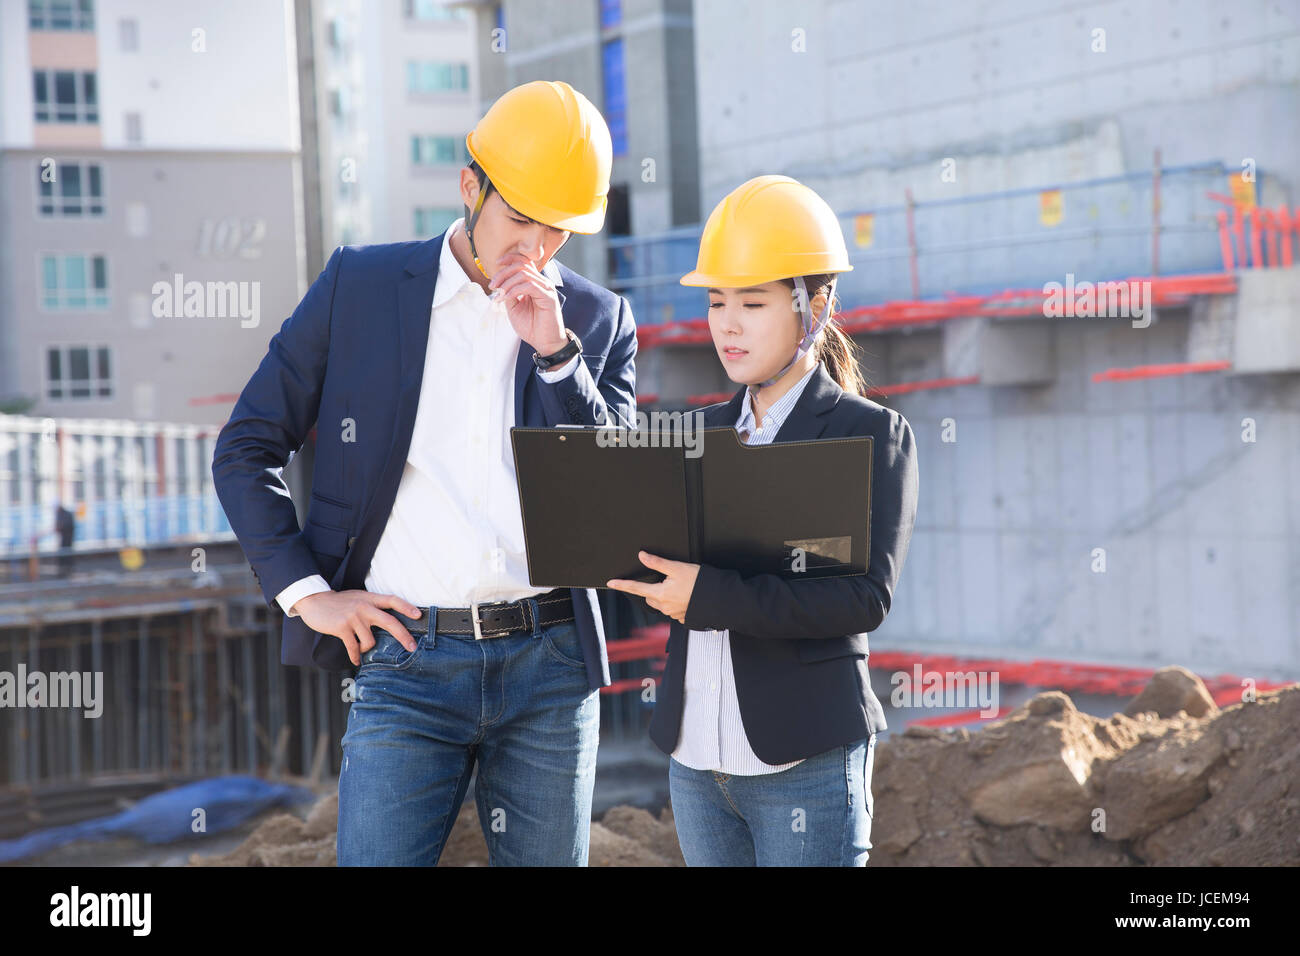 Two architects at construction site Stock Photo